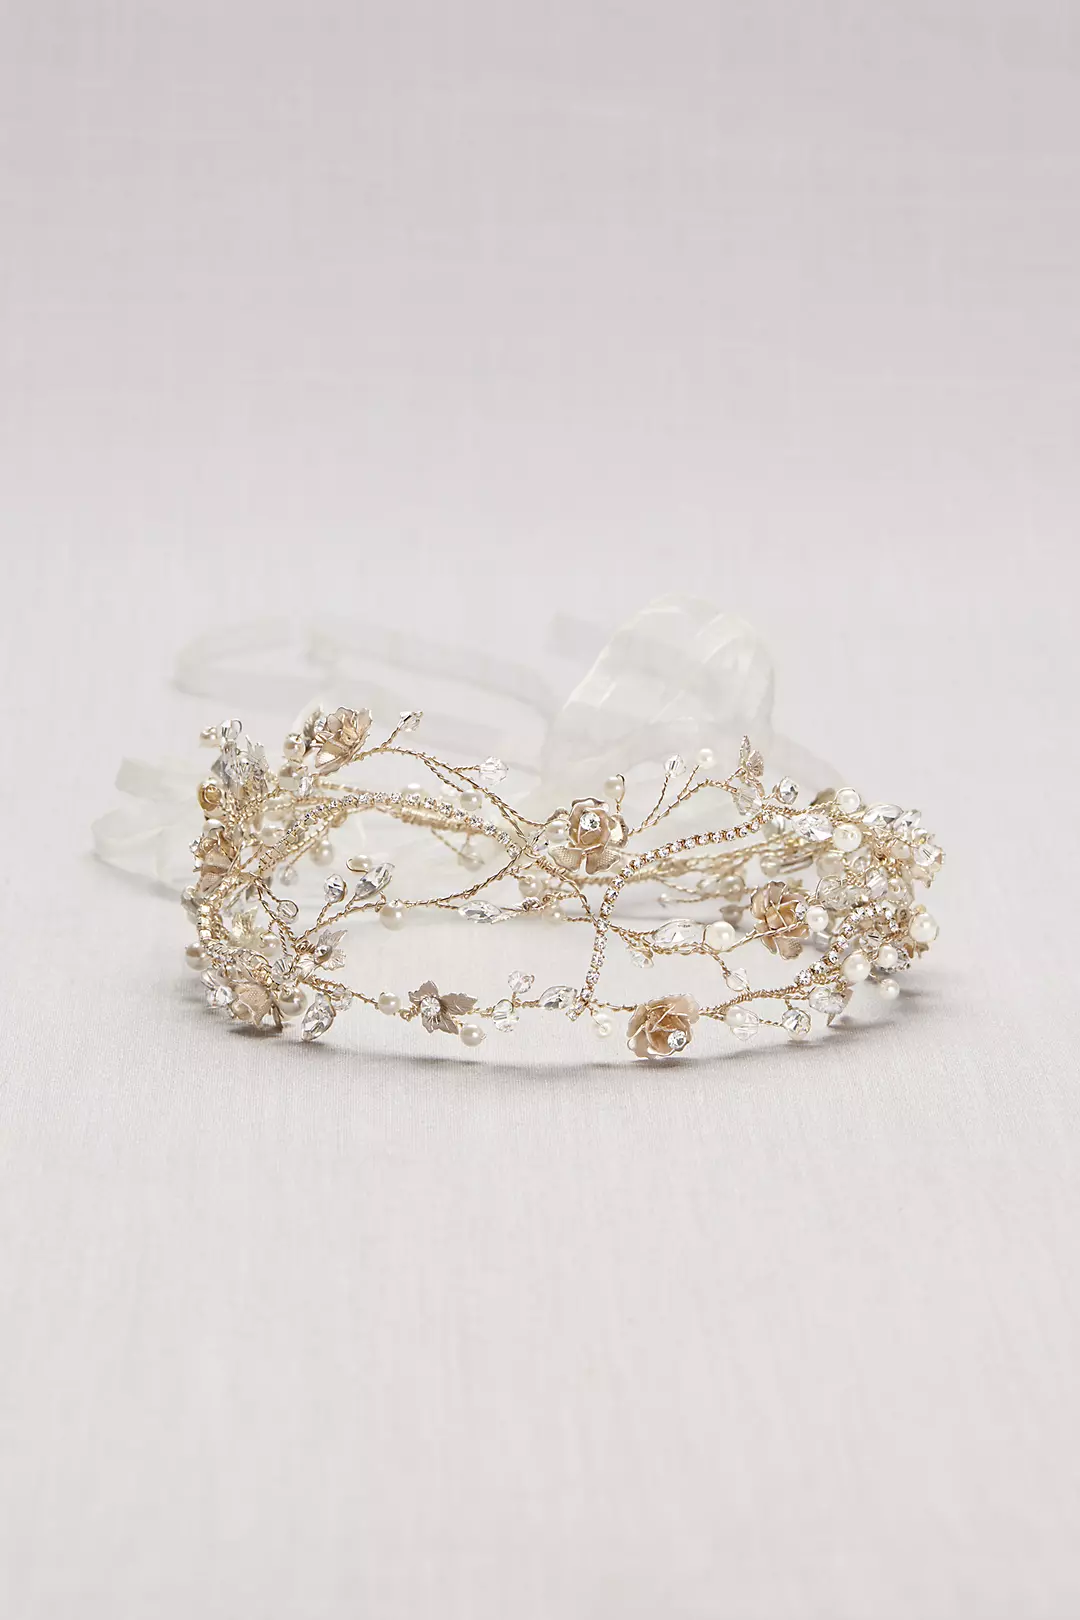 Pearl and Crystal Floral Vines Tie-Back Headband Image